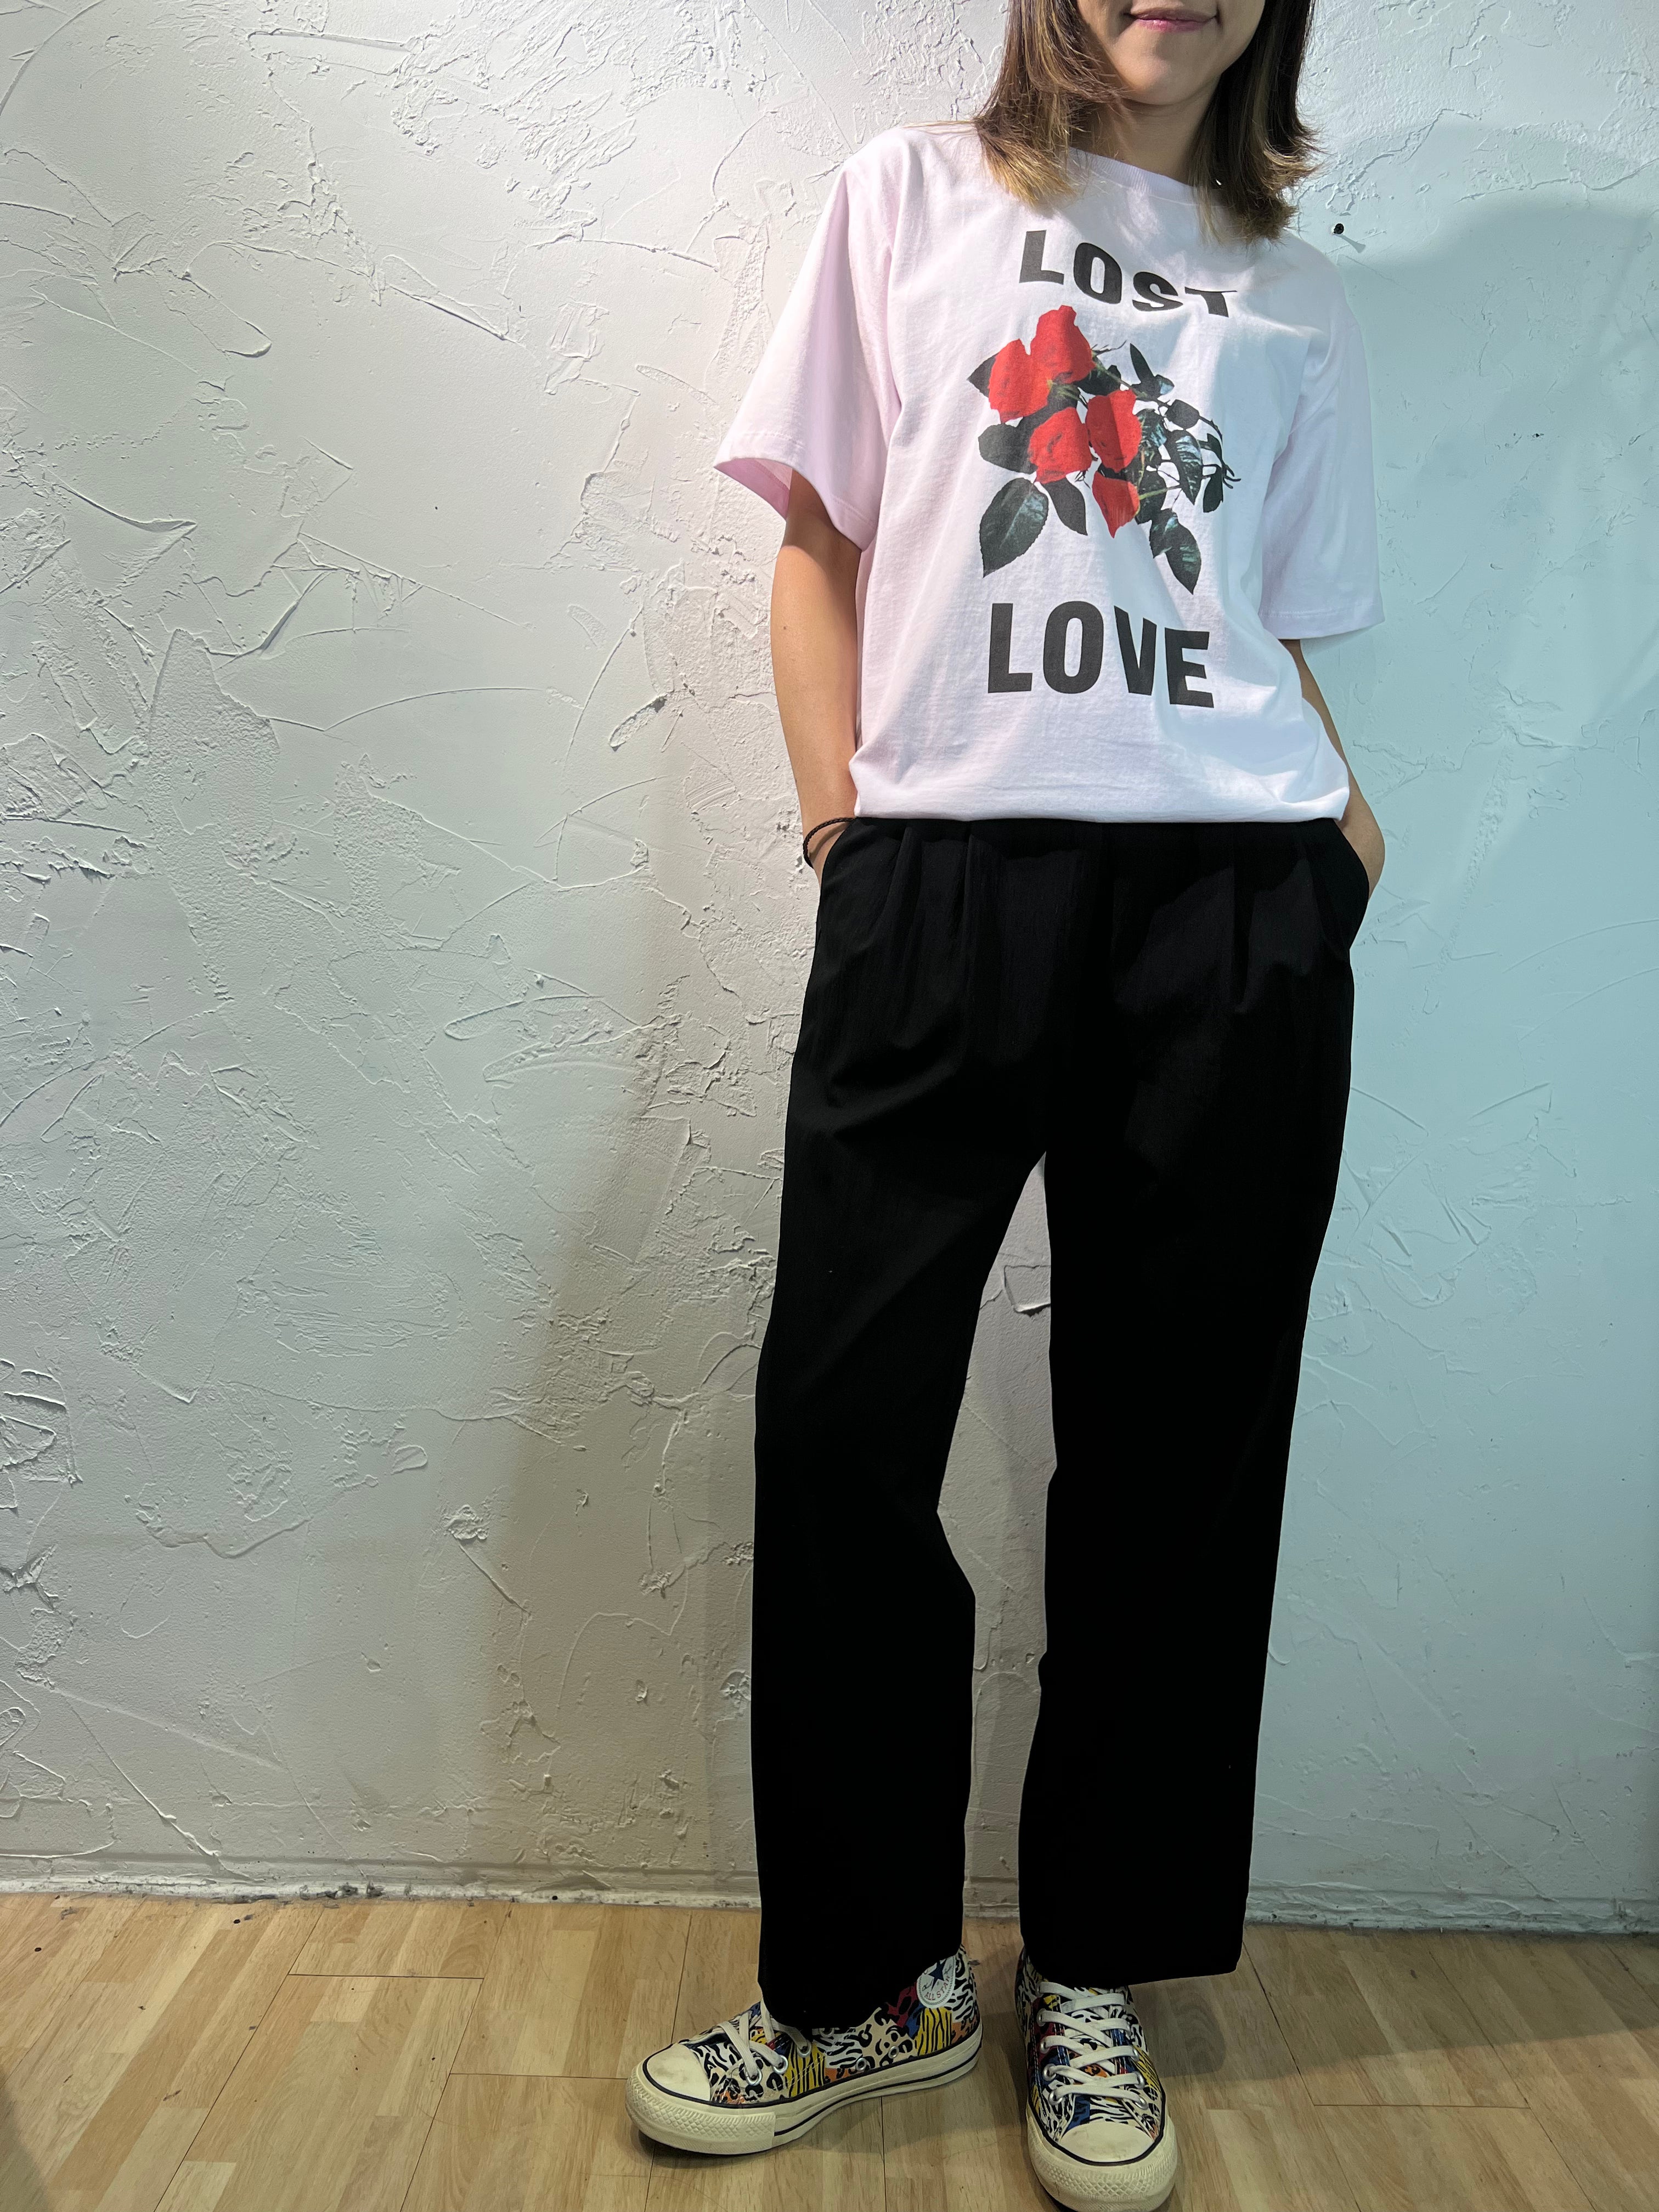 Flowers "Lost Love" T-shirt